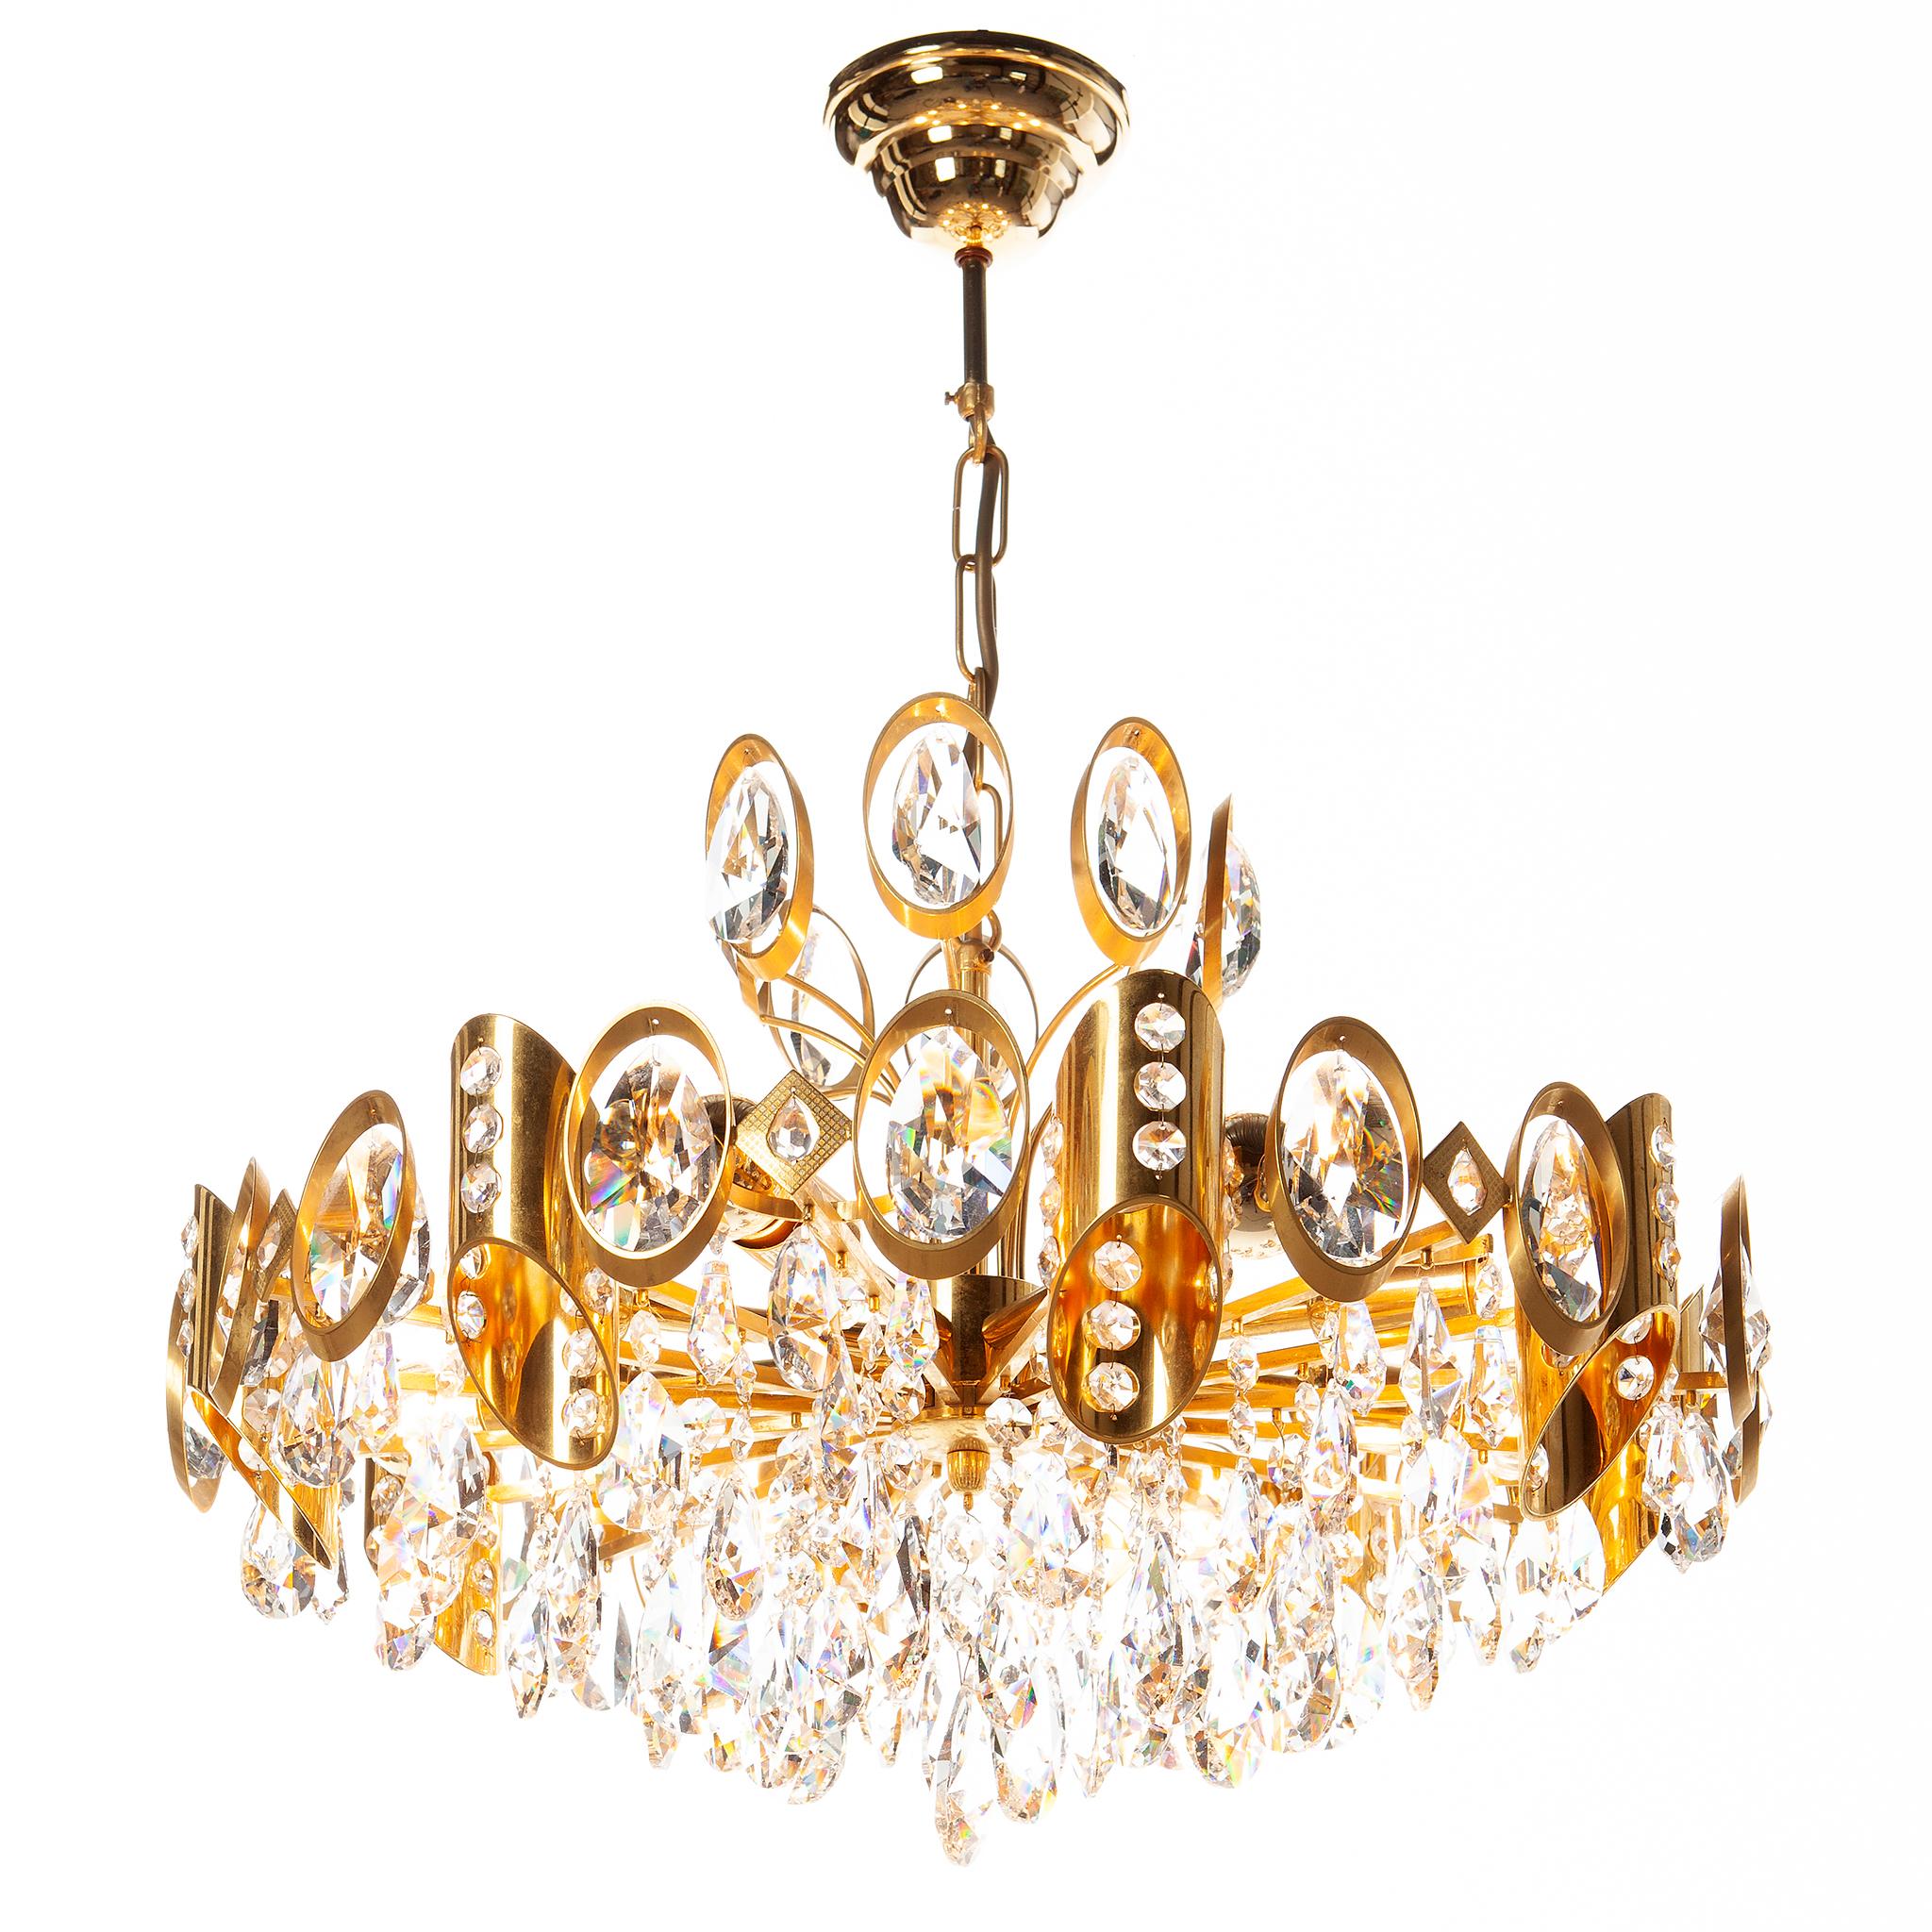 An elegant chandelier by Palwa made in Germany in the 1960s. Multiple gilded brass tier design and asymmetrical cylinders, with cut crystal pendants with beaded crystal accents. 

The light requires eight E14 light bulbs.